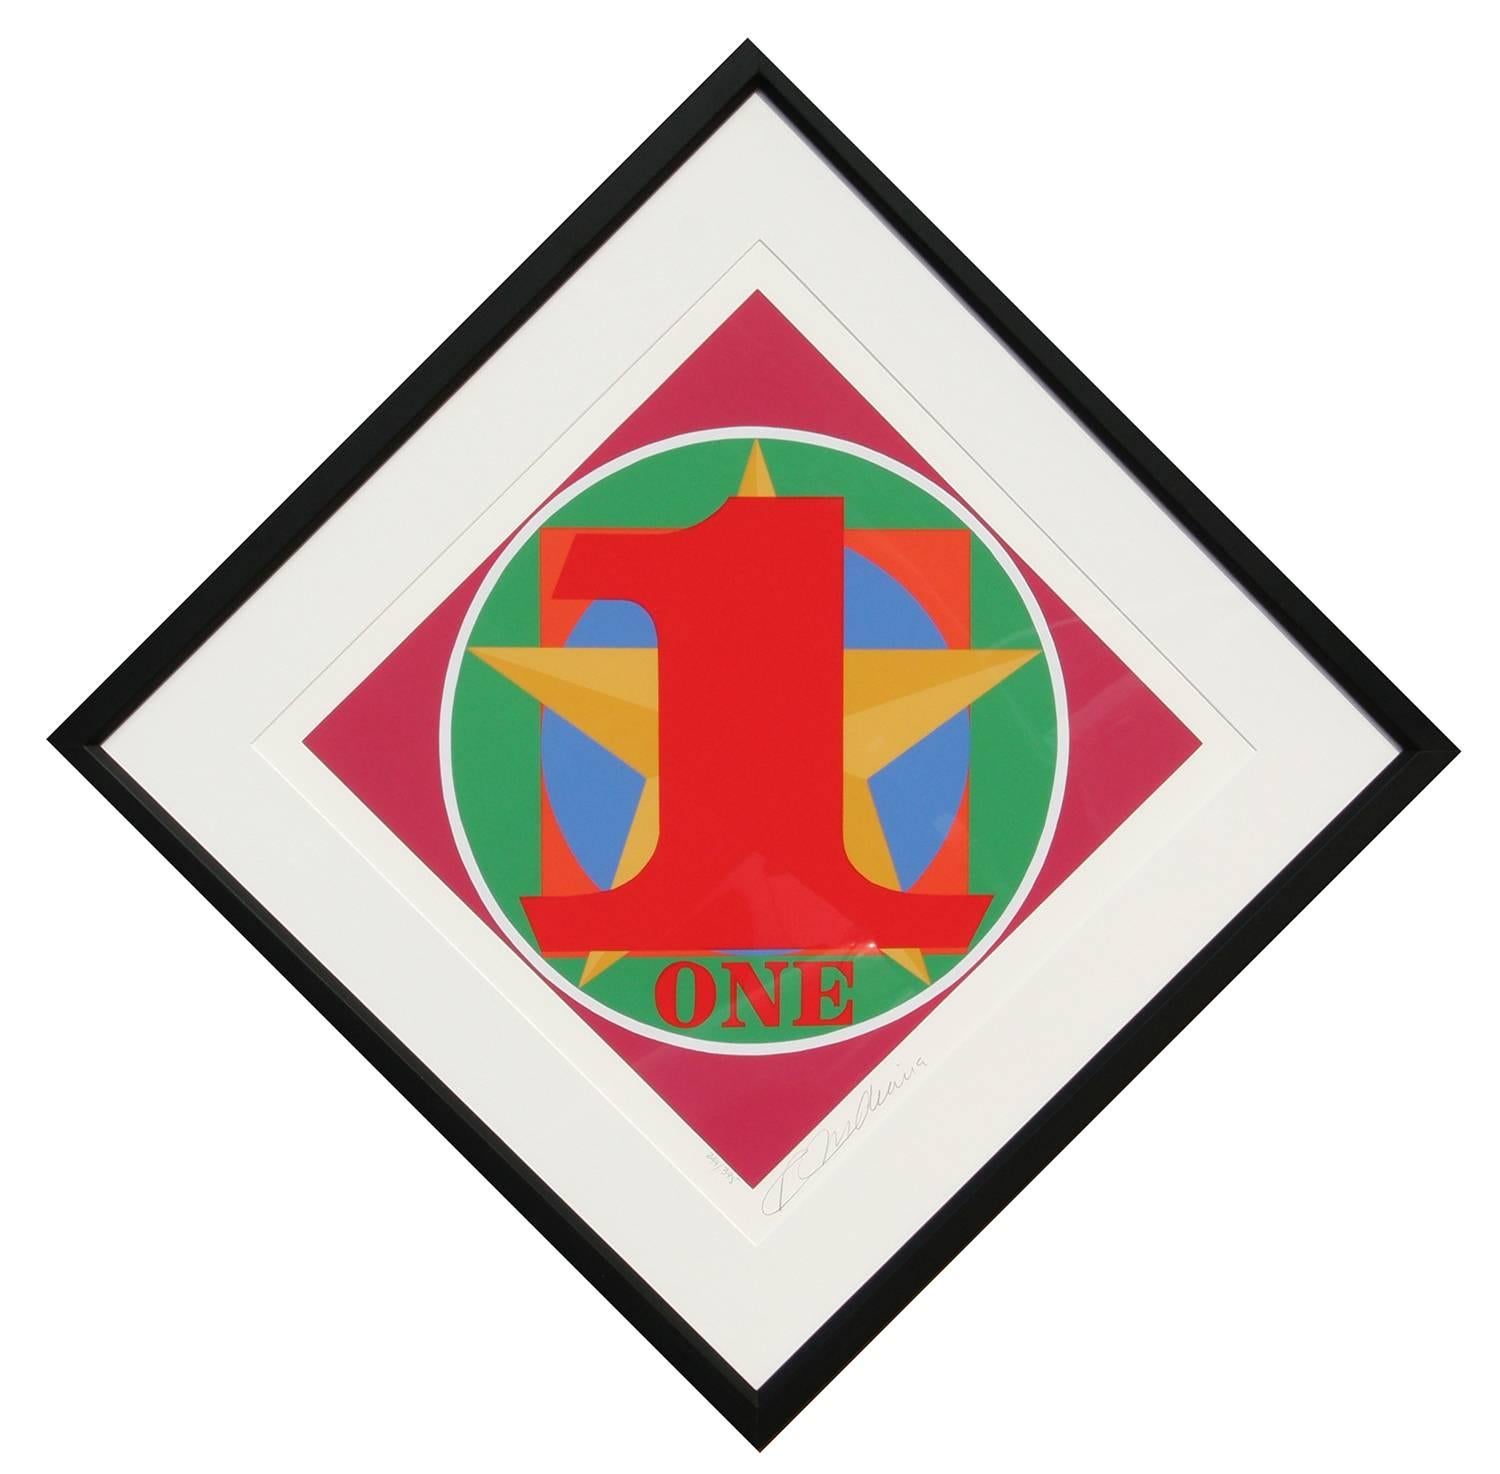 Artist: Robert Indiana, American (1928 - )
Title: One from the American Dream Portfolio
Year: 1997
Medium: Serigraph, signed and numbered in pencil
Edition: 395
Image Size: 14 x 14 inches
Frame Size: 22 x 22 inches